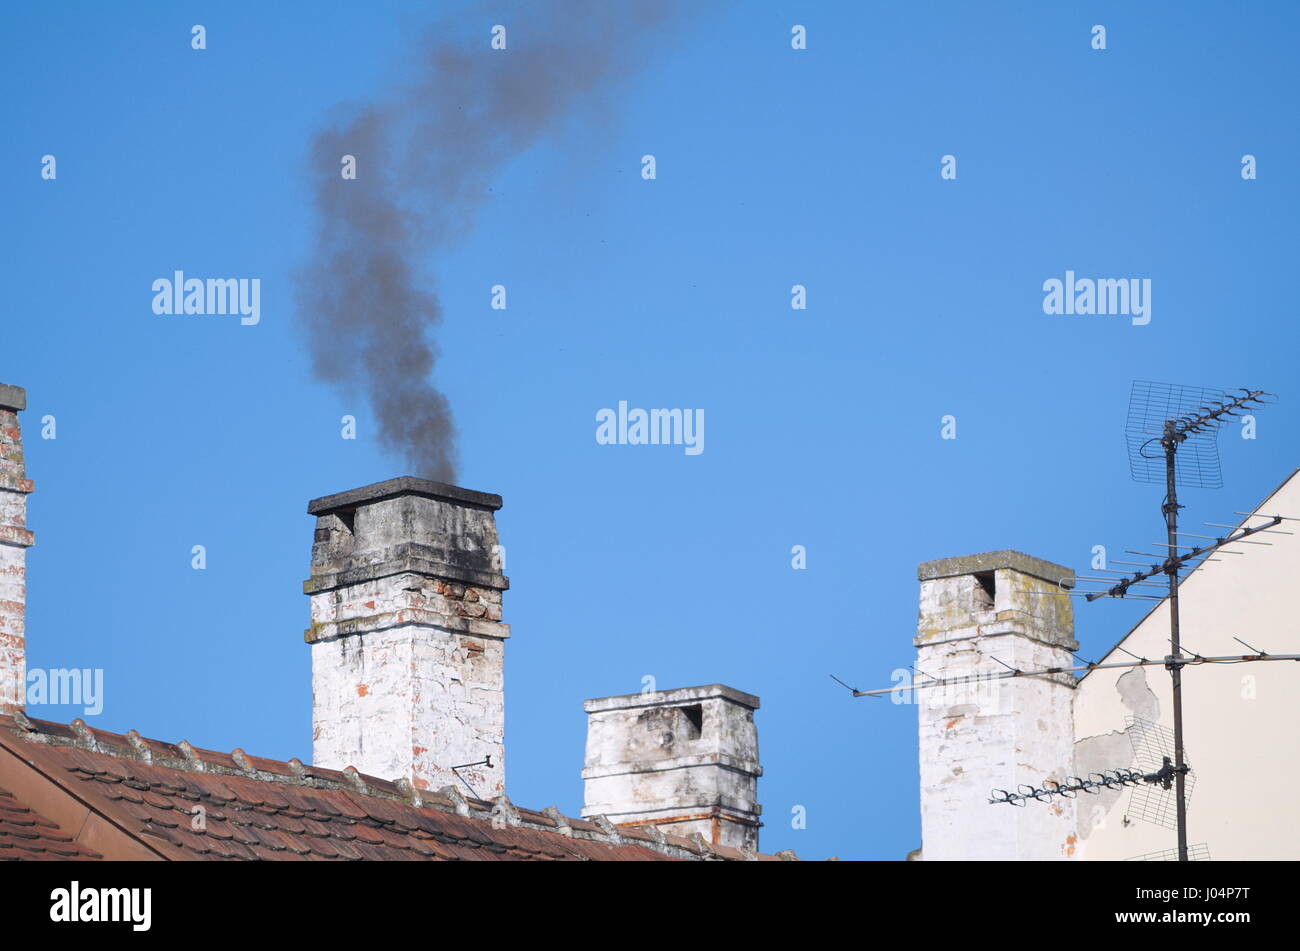 Smoky Residential Chimneys with Clear Blue Sky Stock Photo